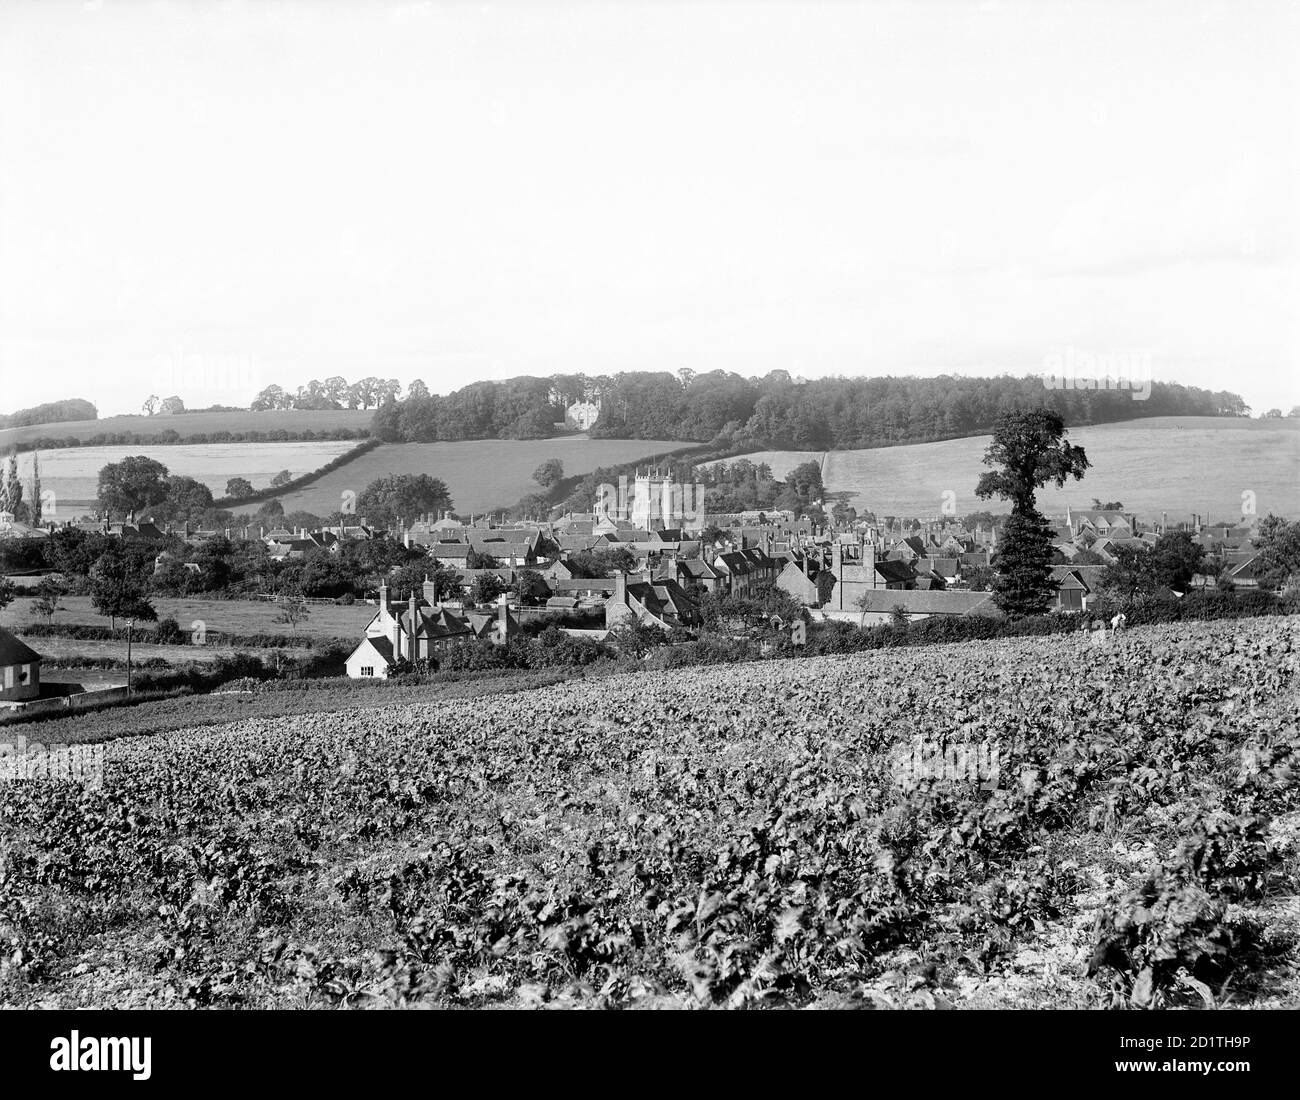 AMERSHAM, Buckinghamshire. A view of the town, lying in the valley of the Misbourne, showing the tower of St Mary's Church. In 1892, the railway arrived and the town buildings spread towards the new station on the hill. Photographed by Henry Taunt (active 1860-1922). Stock Photo